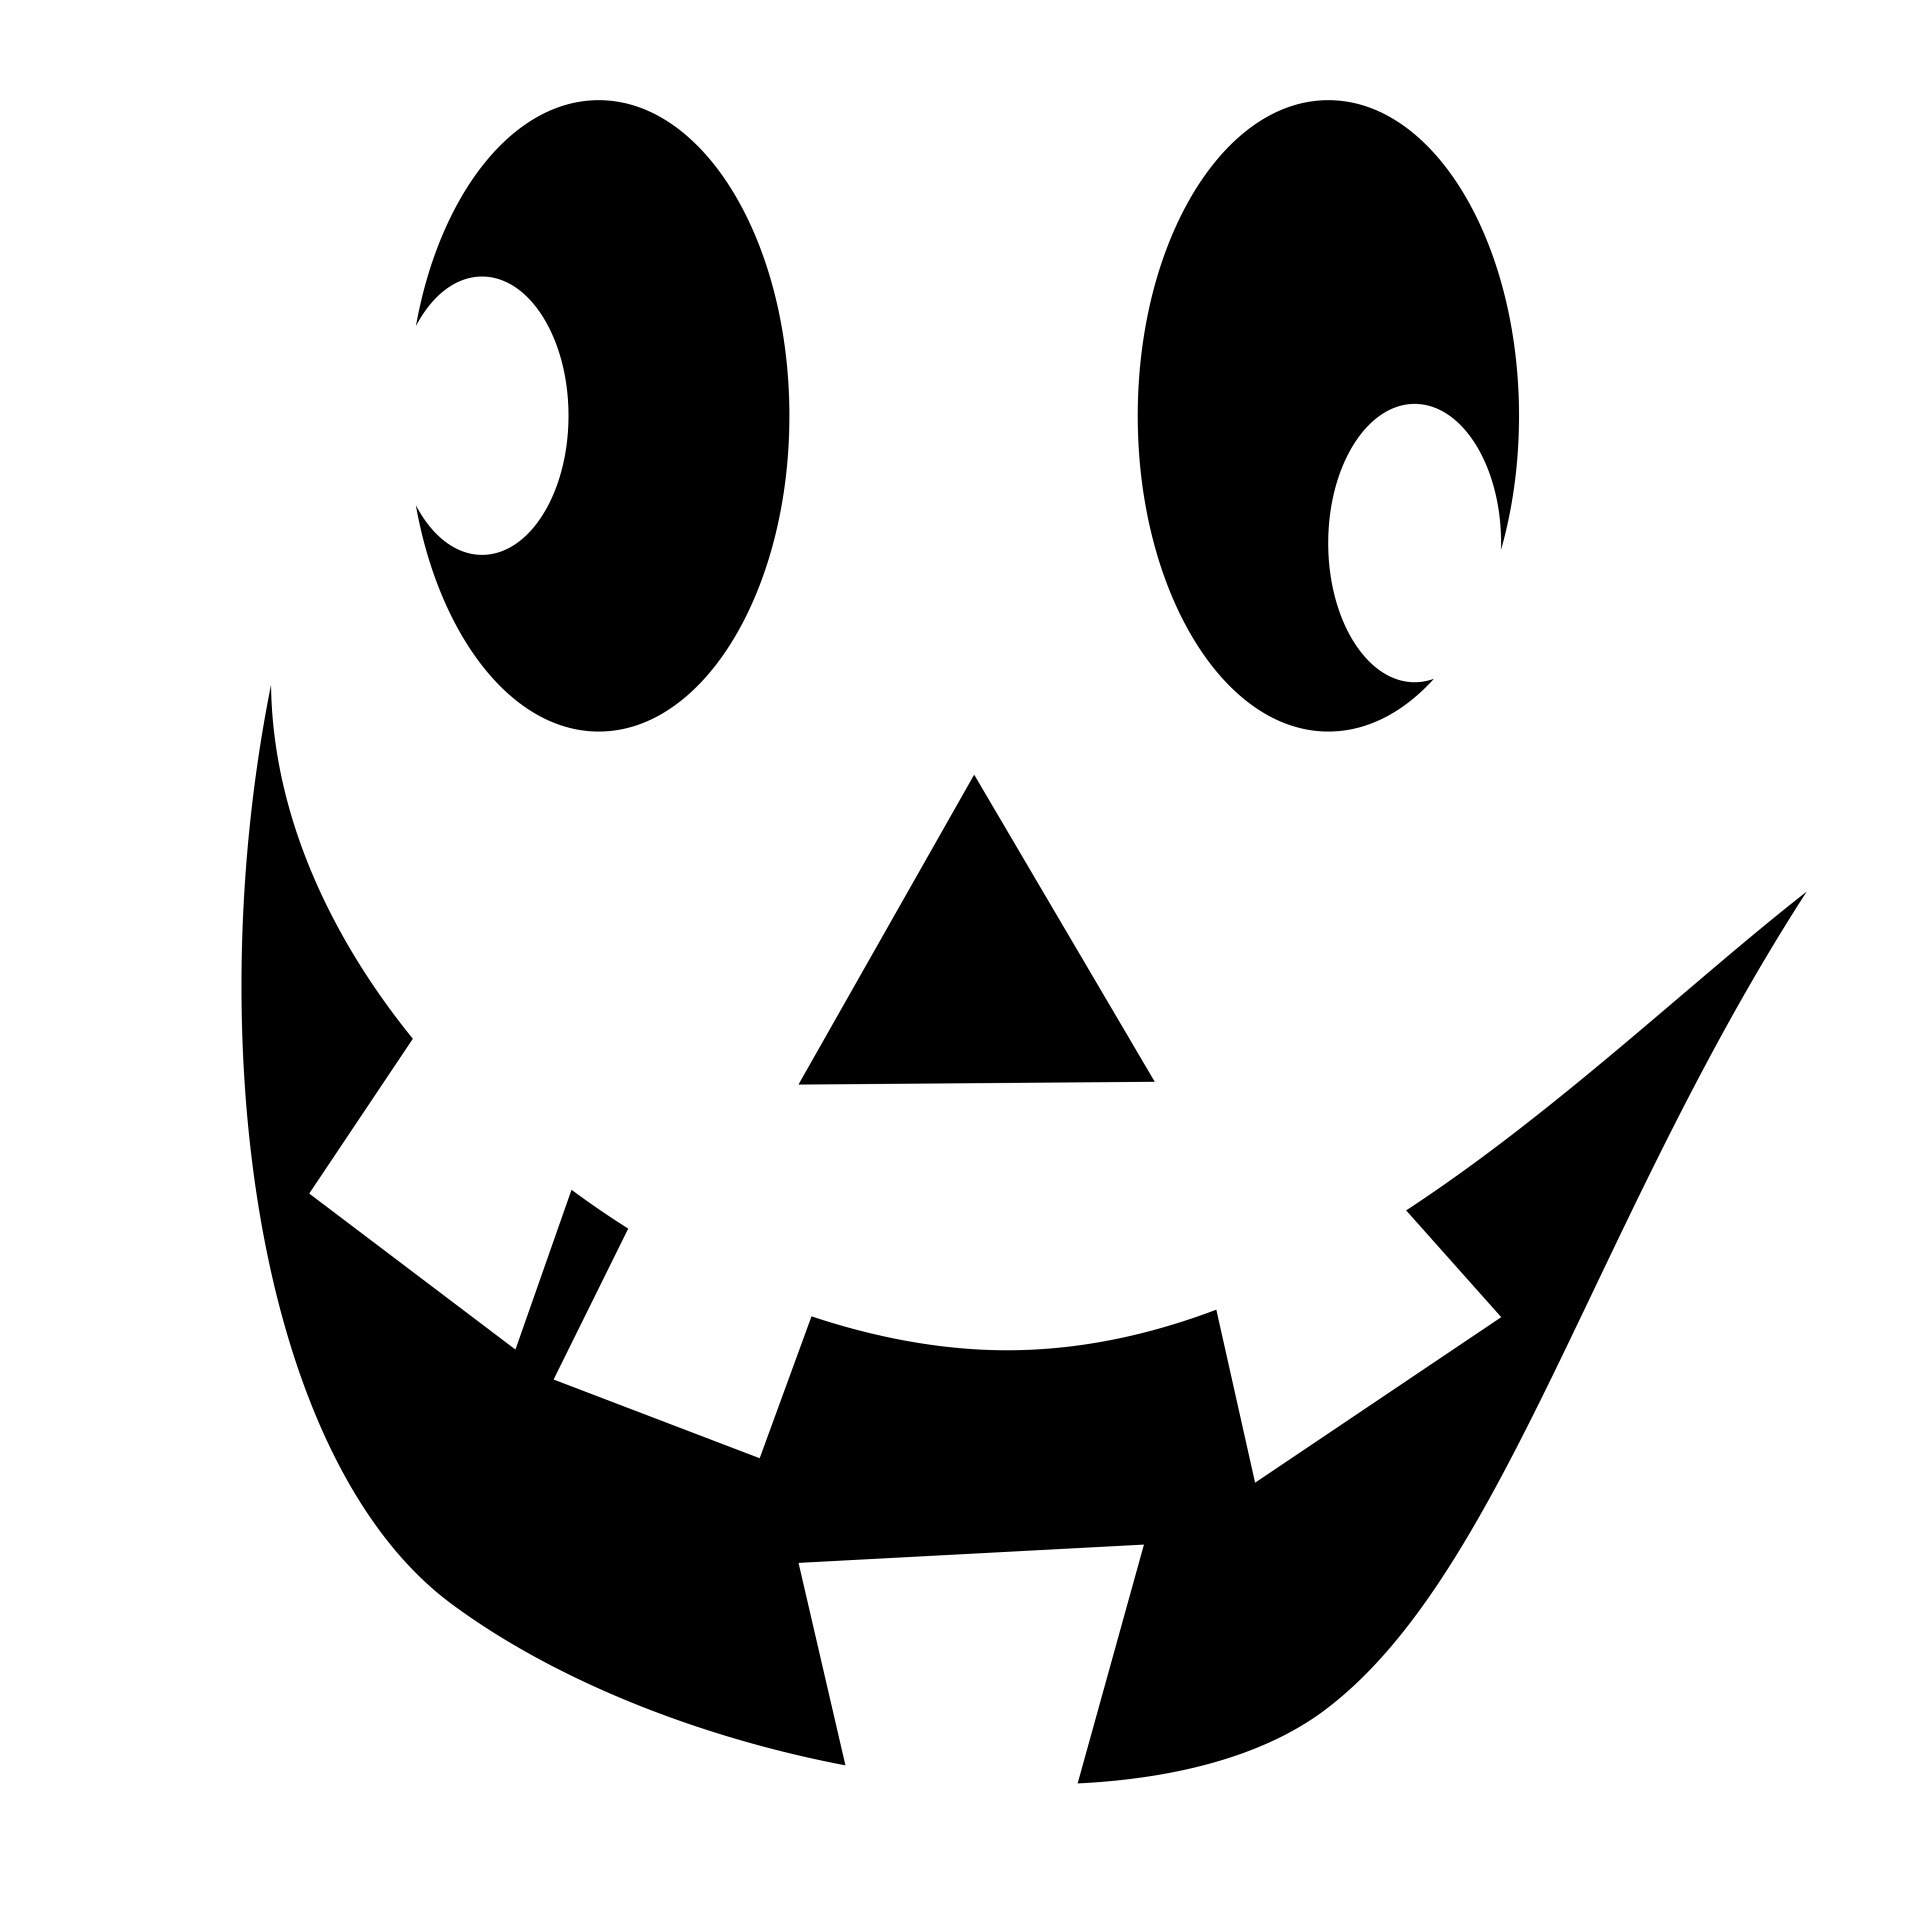 Jack O Lantern Designs Printable And There Are Also Printable Pumpkin Templates For Flying Bats